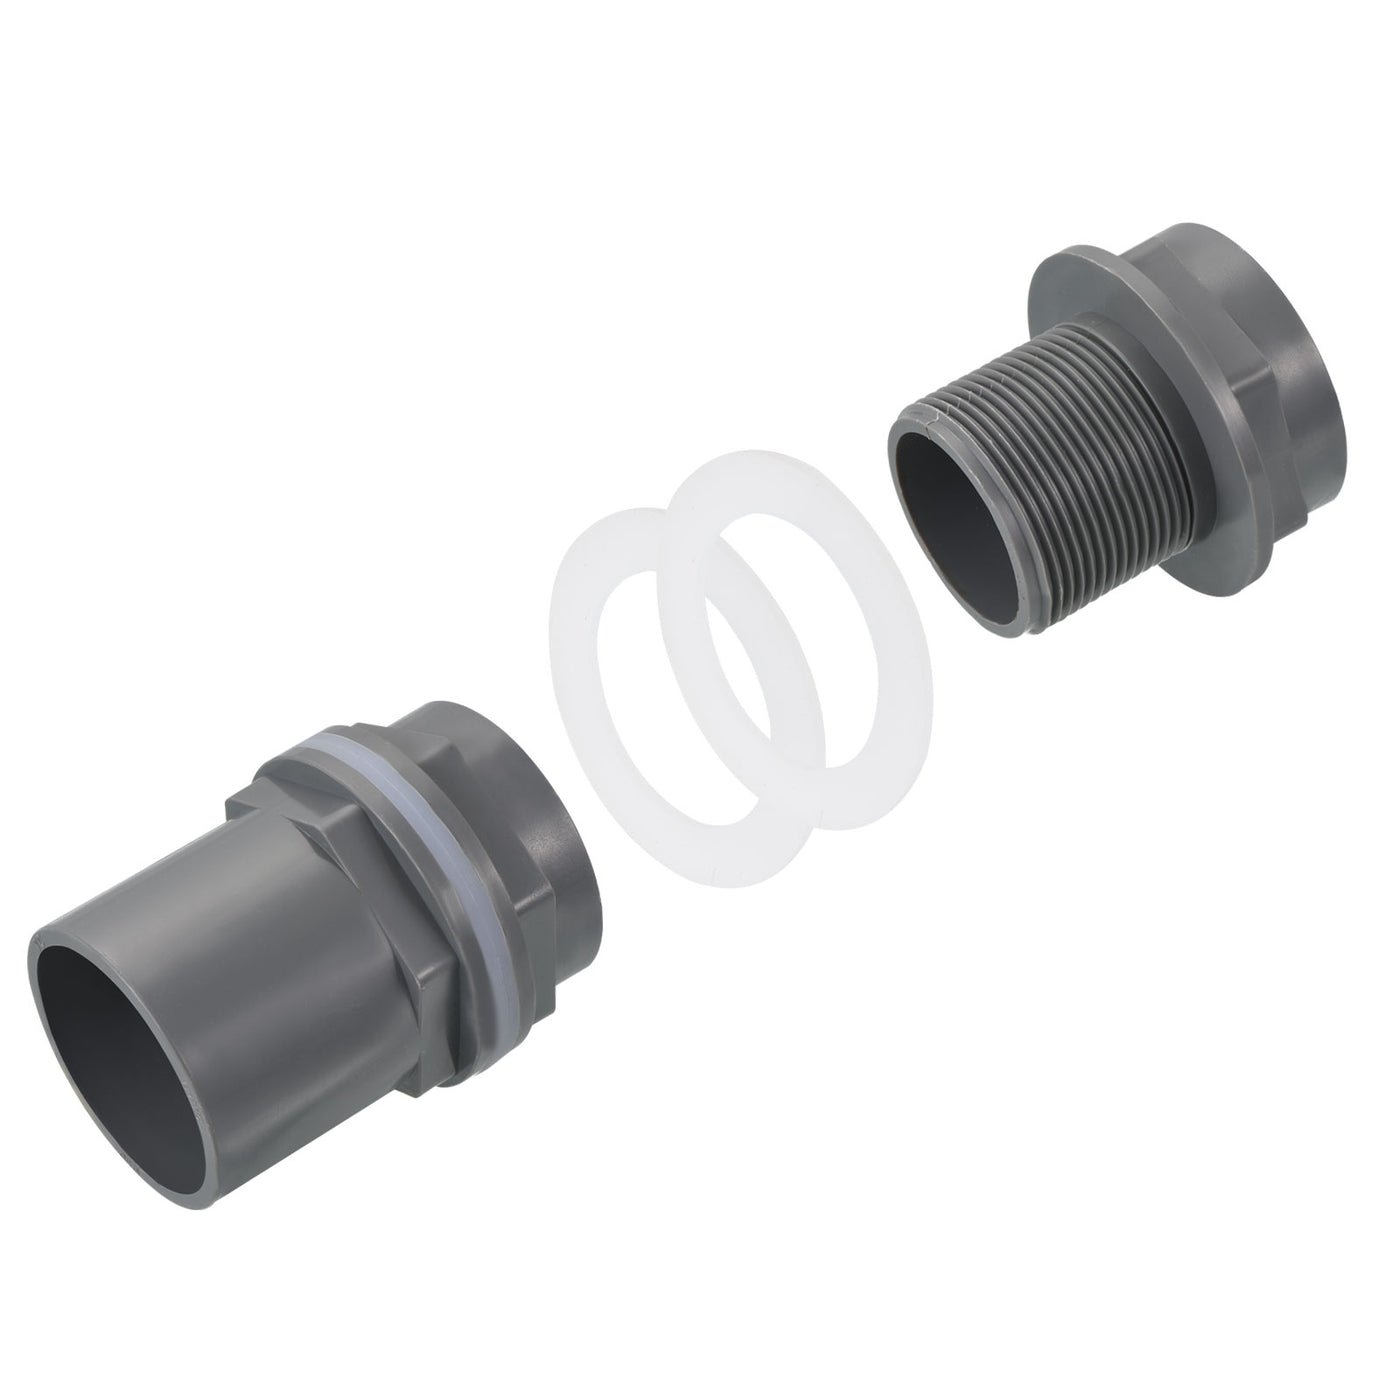 Harfington PVC Water Tank Pipe Fitting 1-1/2" ID DN40, 2 Pack Straight Tube Adapter Connector, Grey